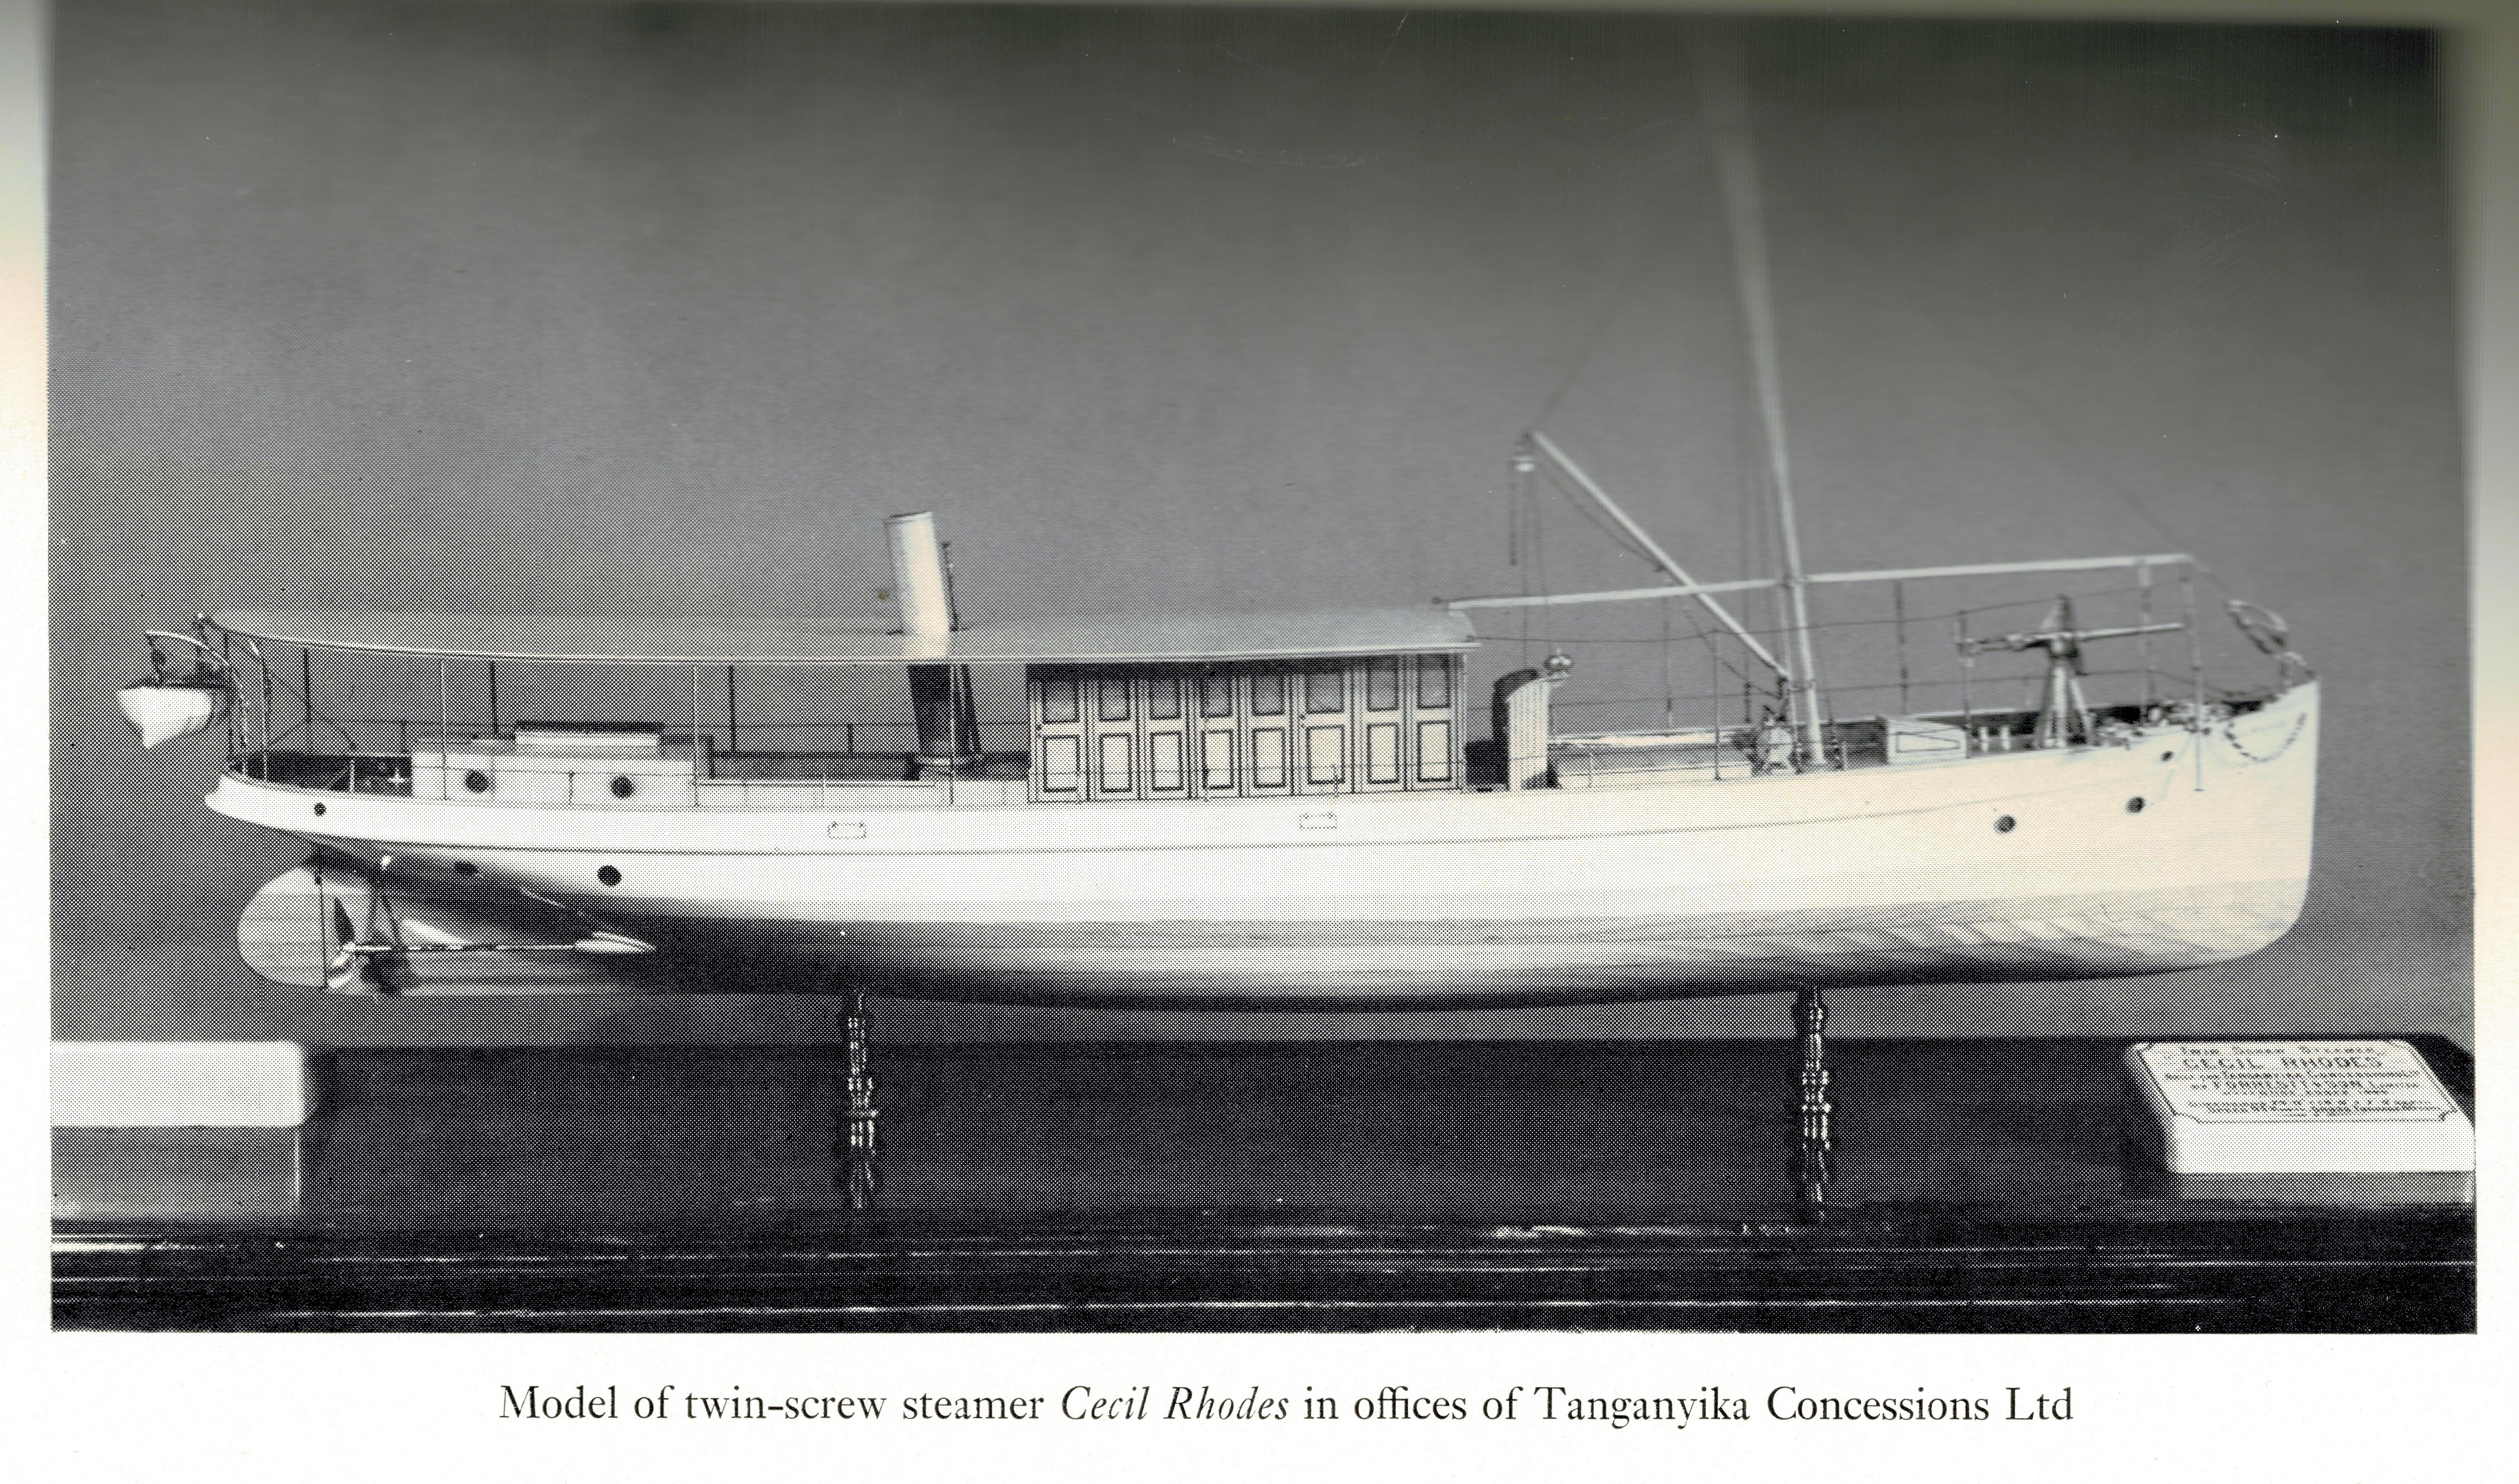 Model of SS Cecil Rhodes